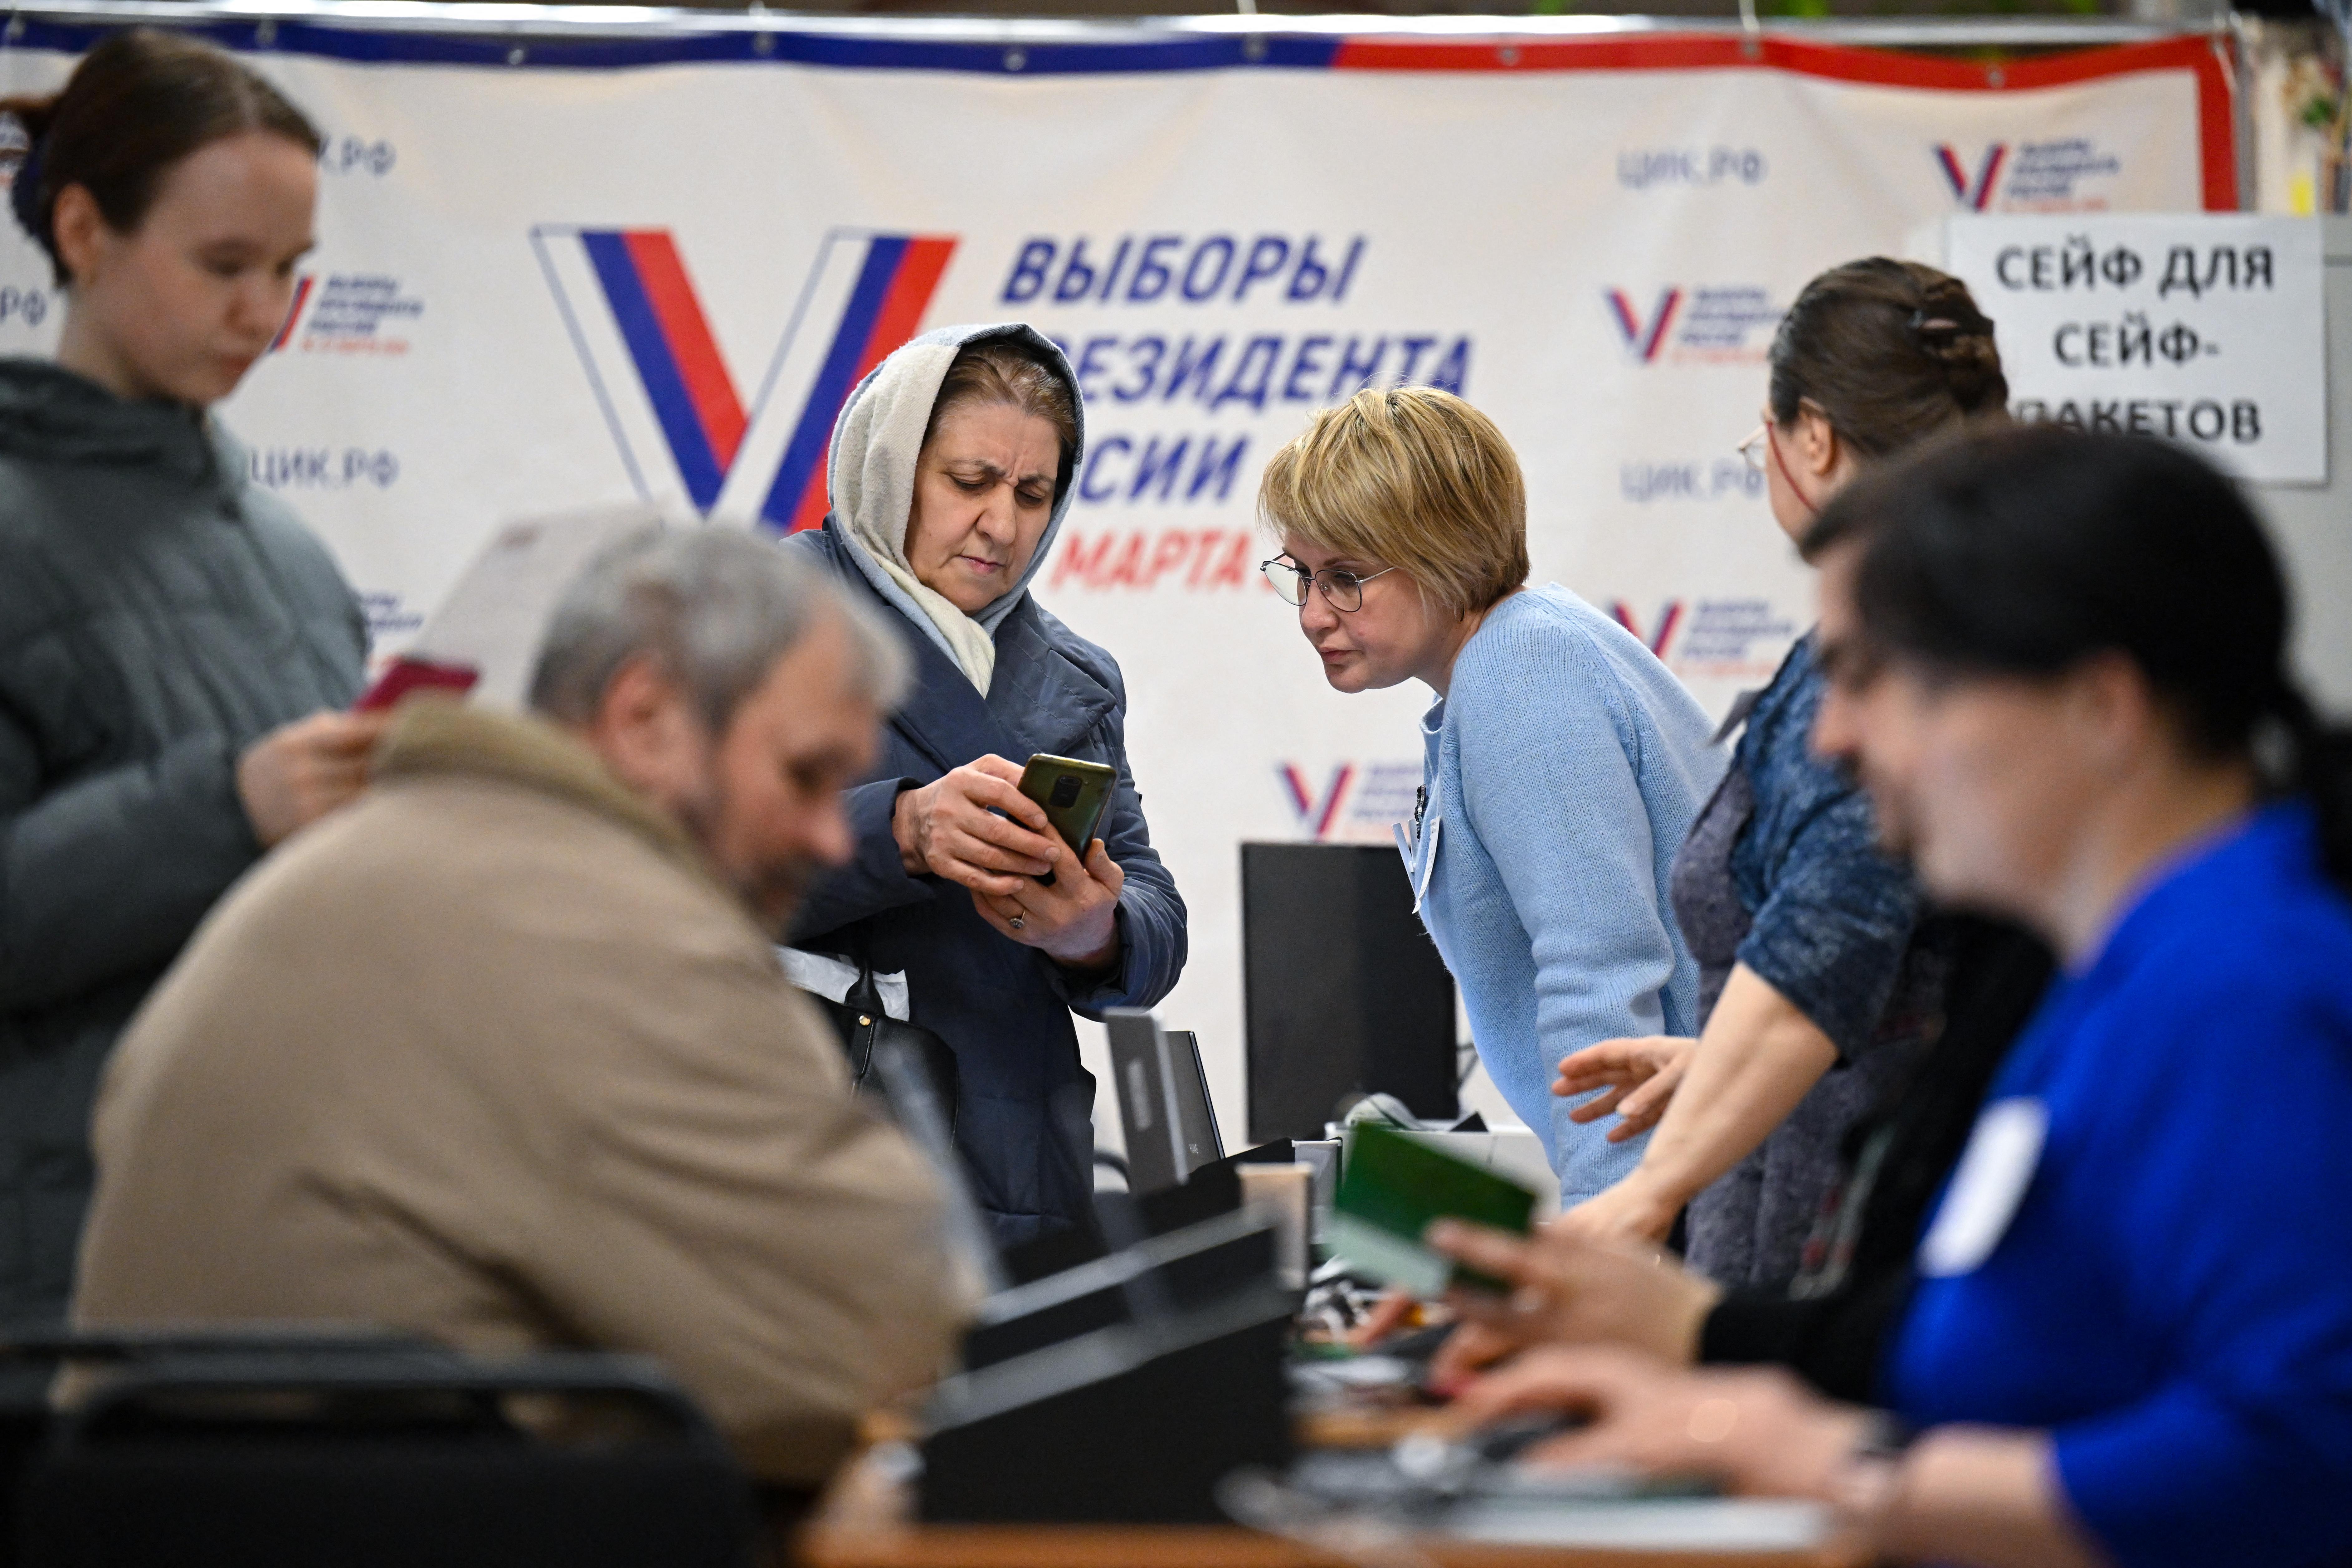 Kiev alleges cyberattacks on polling stations during second day of Russian elections, implicating Putin’s party